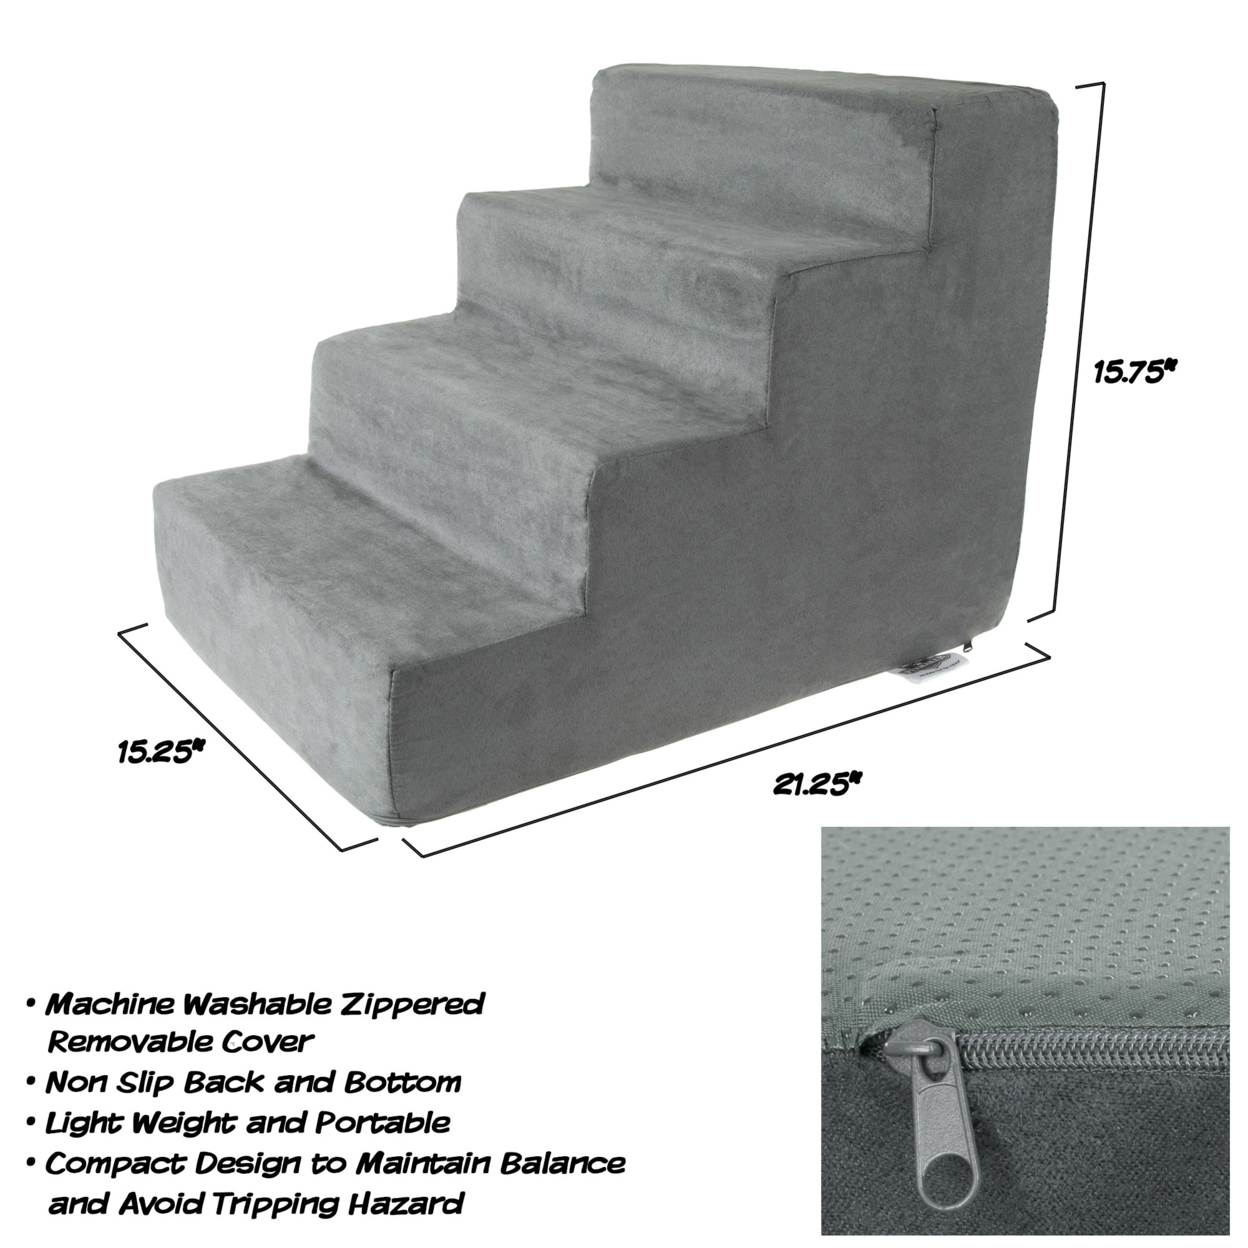 4 Steps High Density Foam Pet Stairs Removable Washable Zipper Cover 15 Inches High Small Dogs Cats Gray